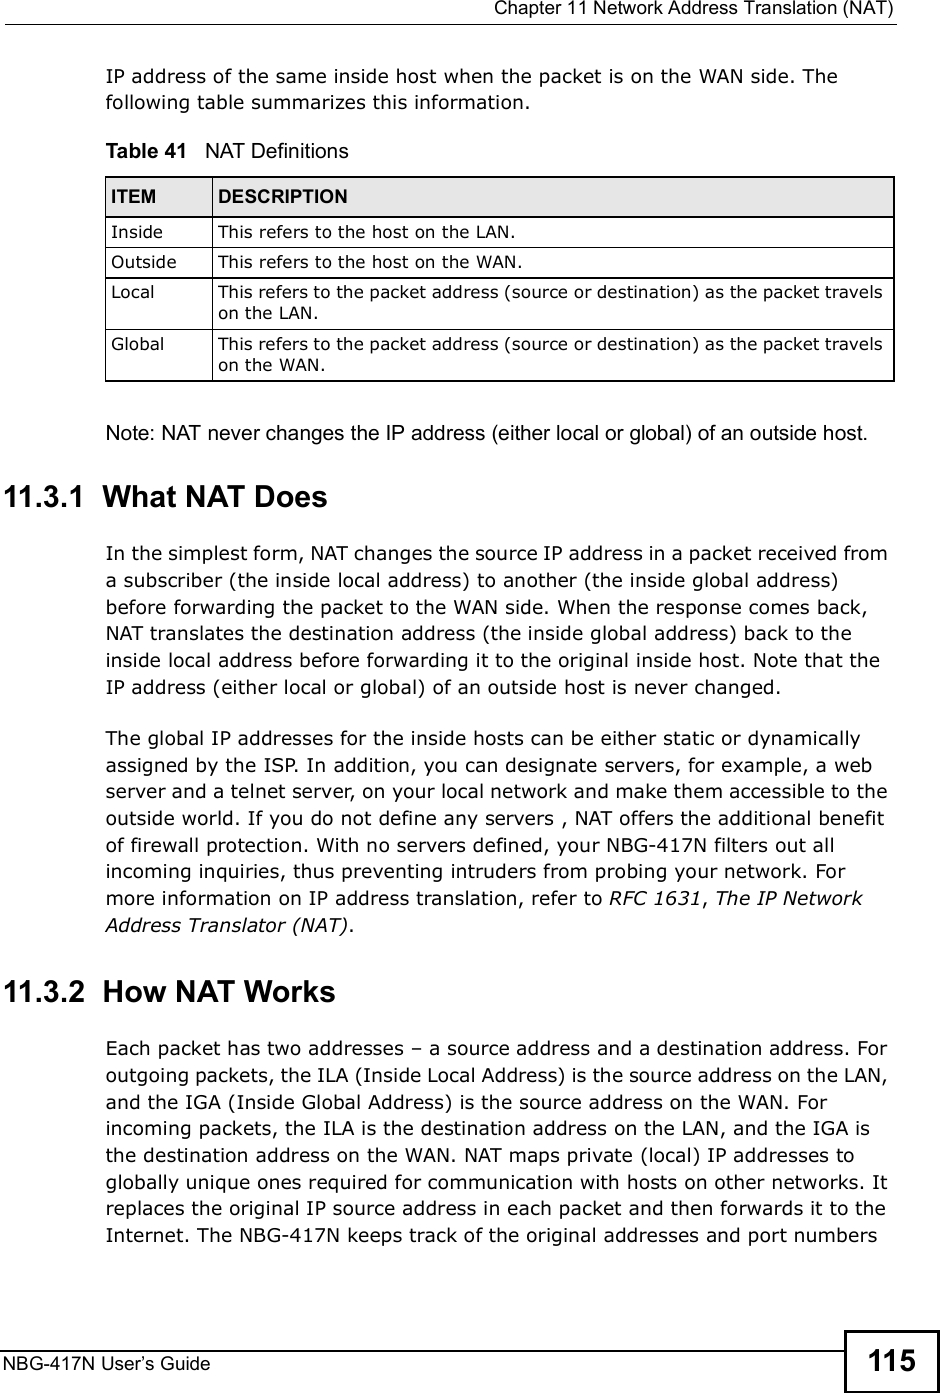  Chapter 11Network Address Translation (NAT)NBG-417N User s Guide 115IP address of the same inside host when the packet is on the WAN side. The following table summarizes this information.Note: NAT never changes the IP address (either local or global) of an outside host.11.3.1  What NAT DoesIn the simplest form, NAT changes the source IP address in a packet received from a subscriber (the inside local address) to another (the inside global address) before forwarding the packet to the WAN side. When the response comes back, NAT translates the destination address (the inside global address) back to the inside local address before forwarding it to the original inside host. Note that the IP address (either local or global) of an outside host is never changed.The global IP addresses for the inside hosts can be either static or dynamically assigned by the ISP. In addition, you can designate servers, for example, a web server and a telnet server, on your local network and make them accessible to the outside world. If you do not define any servers , NAT offers the additional benefit of firewall protection. With no servers defined, your NBG-417N filters out all incoming inquiries, thus preventing intruders from probing your network. For more information on IP address translation, refer to RFC 1631, The IP Network Address Translator (NAT).11.3.2  How NAT WorksEach packet has two addresses $ a source address and a destination address. For outgoing packets, the ILA (Inside Local Address) is the source address on the LAN, and the IGA (Inside Global Address) is the source address on the WAN. For incoming packets, the ILA is the destination address on the LAN, and the IGA is the destination address on the WAN. NAT maps private (local) IP addresses to globally unique ones required for communication with hosts on other networks. It replaces the original IP source address in each packet and then forwards it to the Internet. The NBG-417N keeps track of the original addresses and port numbers Table 41   NAT DefinitionsITEM DESCRIPTIONInside This refers to the host on the LAN.Outside This refers to the host on the WAN.Local This refers to the packet address (source or destination) as the packet travels on the LAN.Global This refers to the packet address (source or destination) as the packet travels on the WAN.